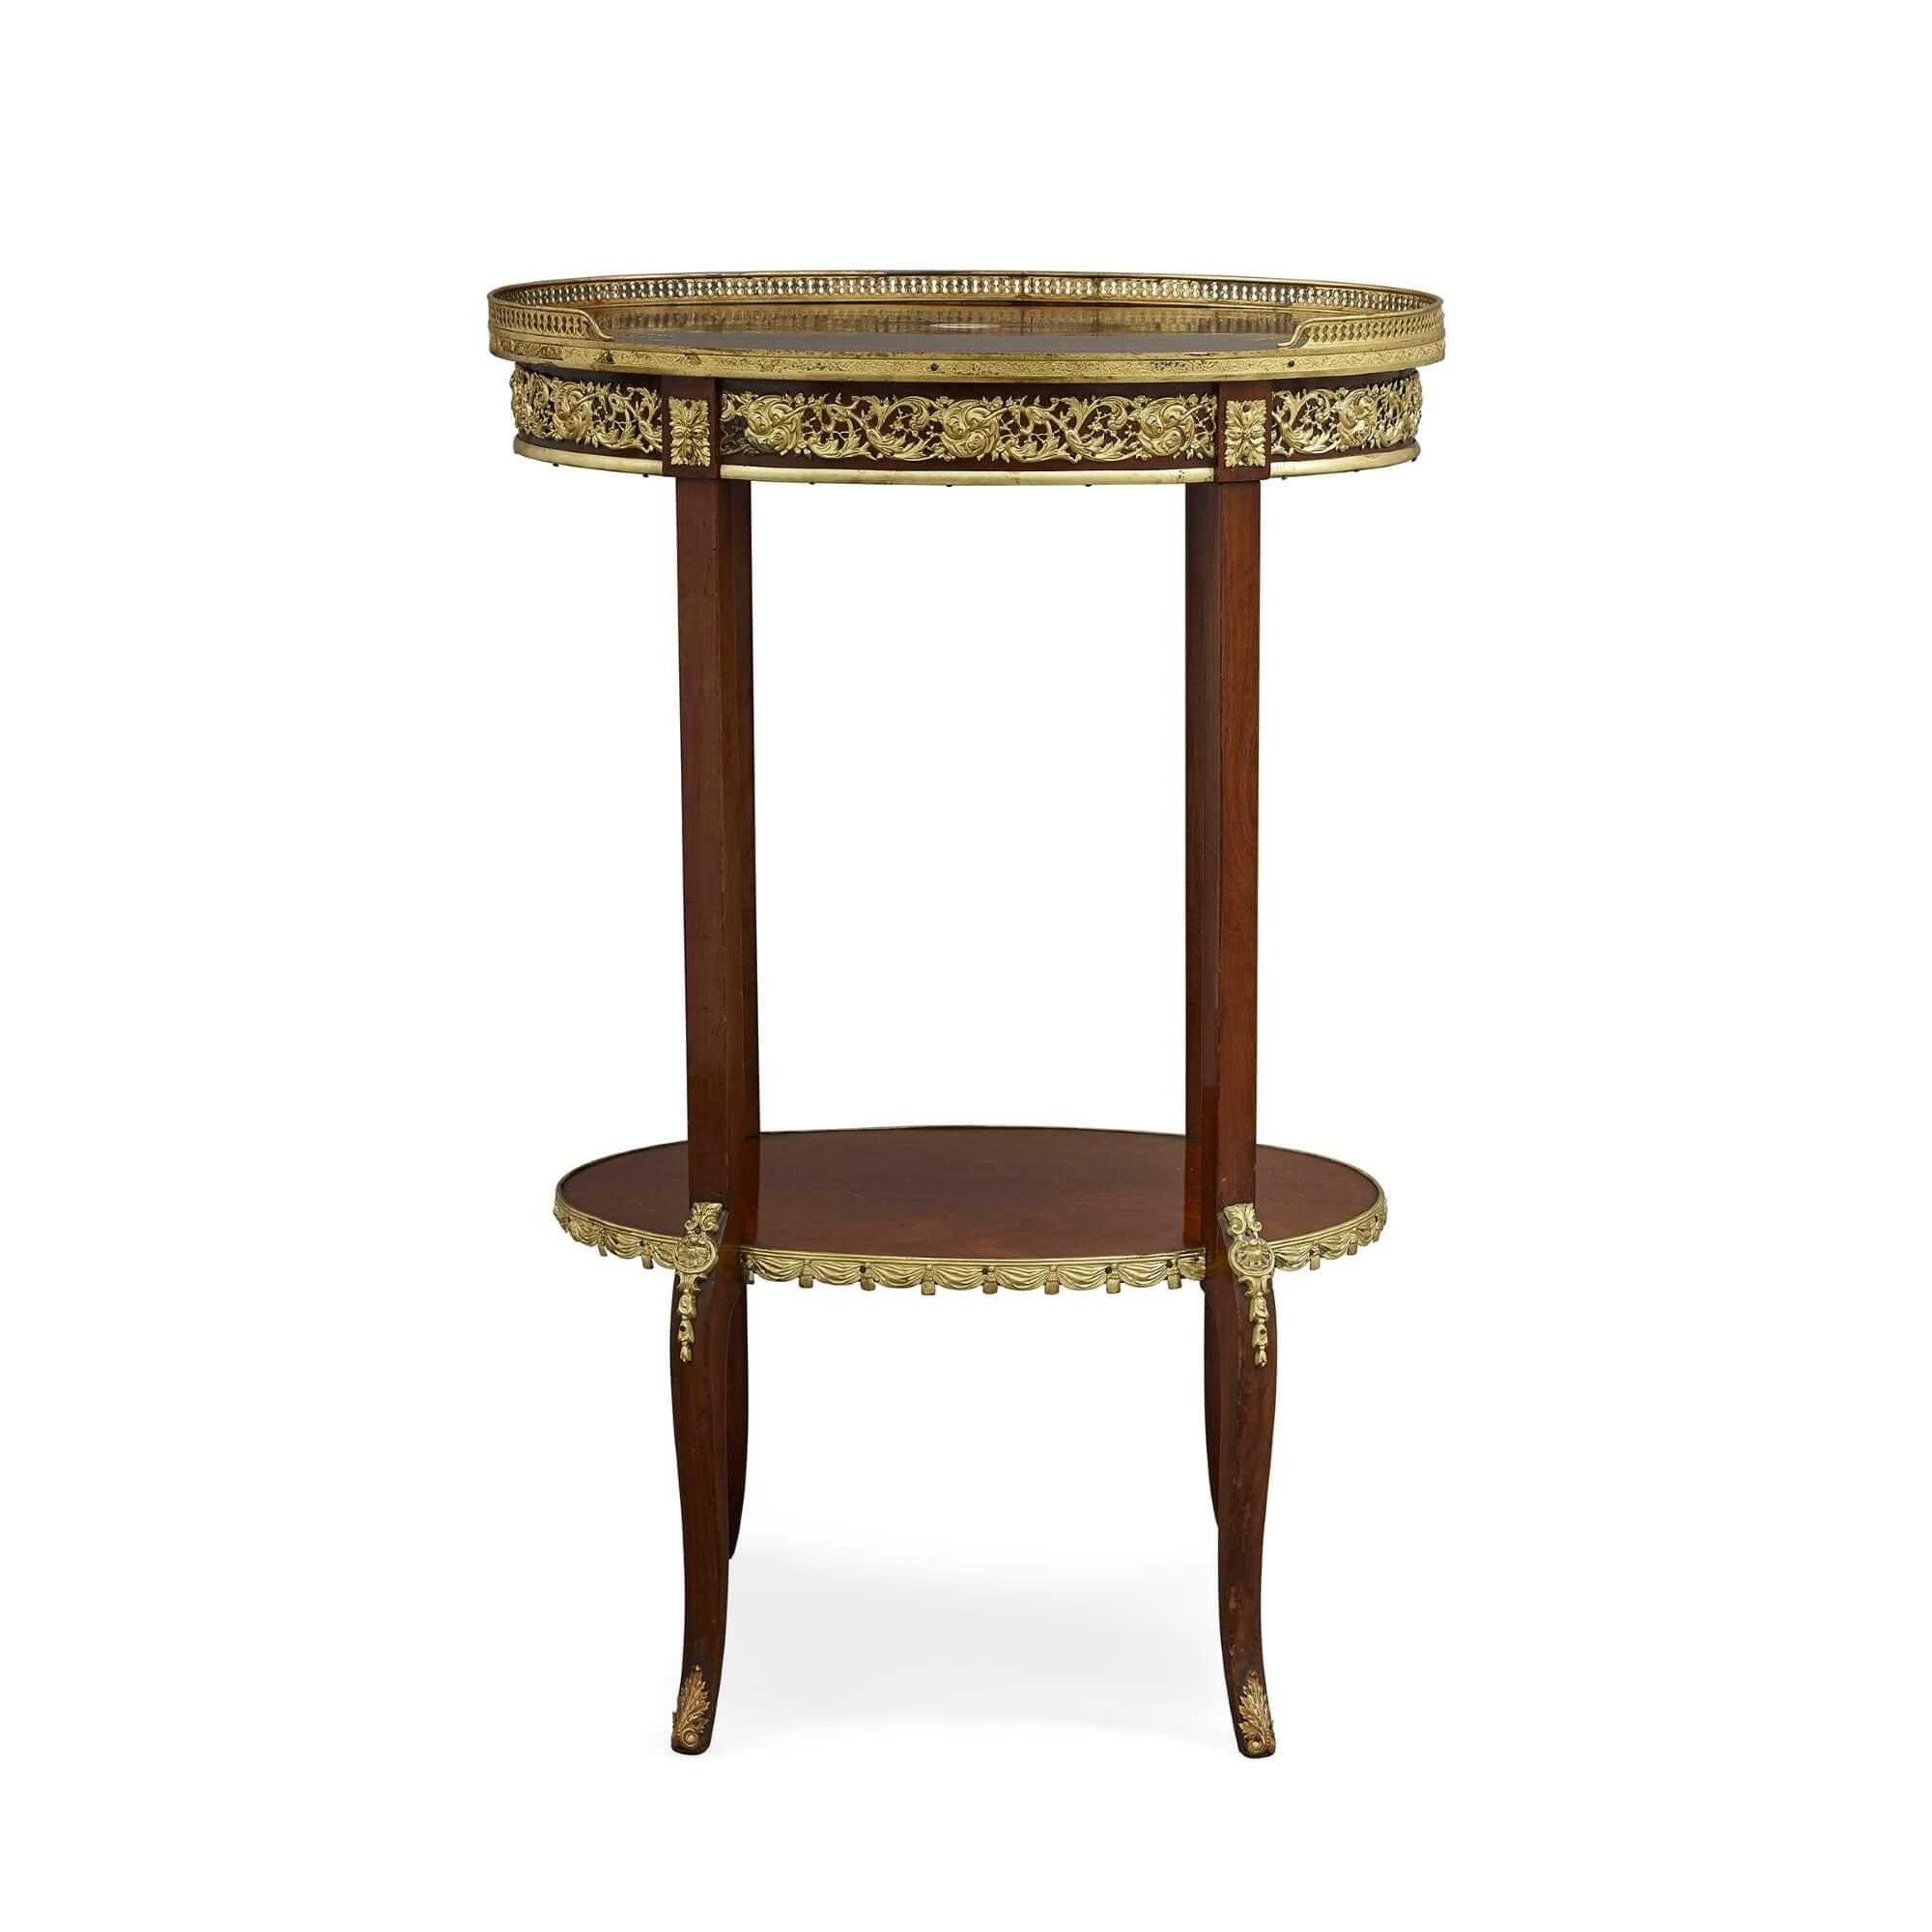 French Transitional style ormolu mounted wood étagère
French, late 19th century
Measures: Height 80cm, width 54cm, depth 37cm

This fine étagère—a shelved side table—is crafted in the Transitional style from mahogany and gilt bronze. The table